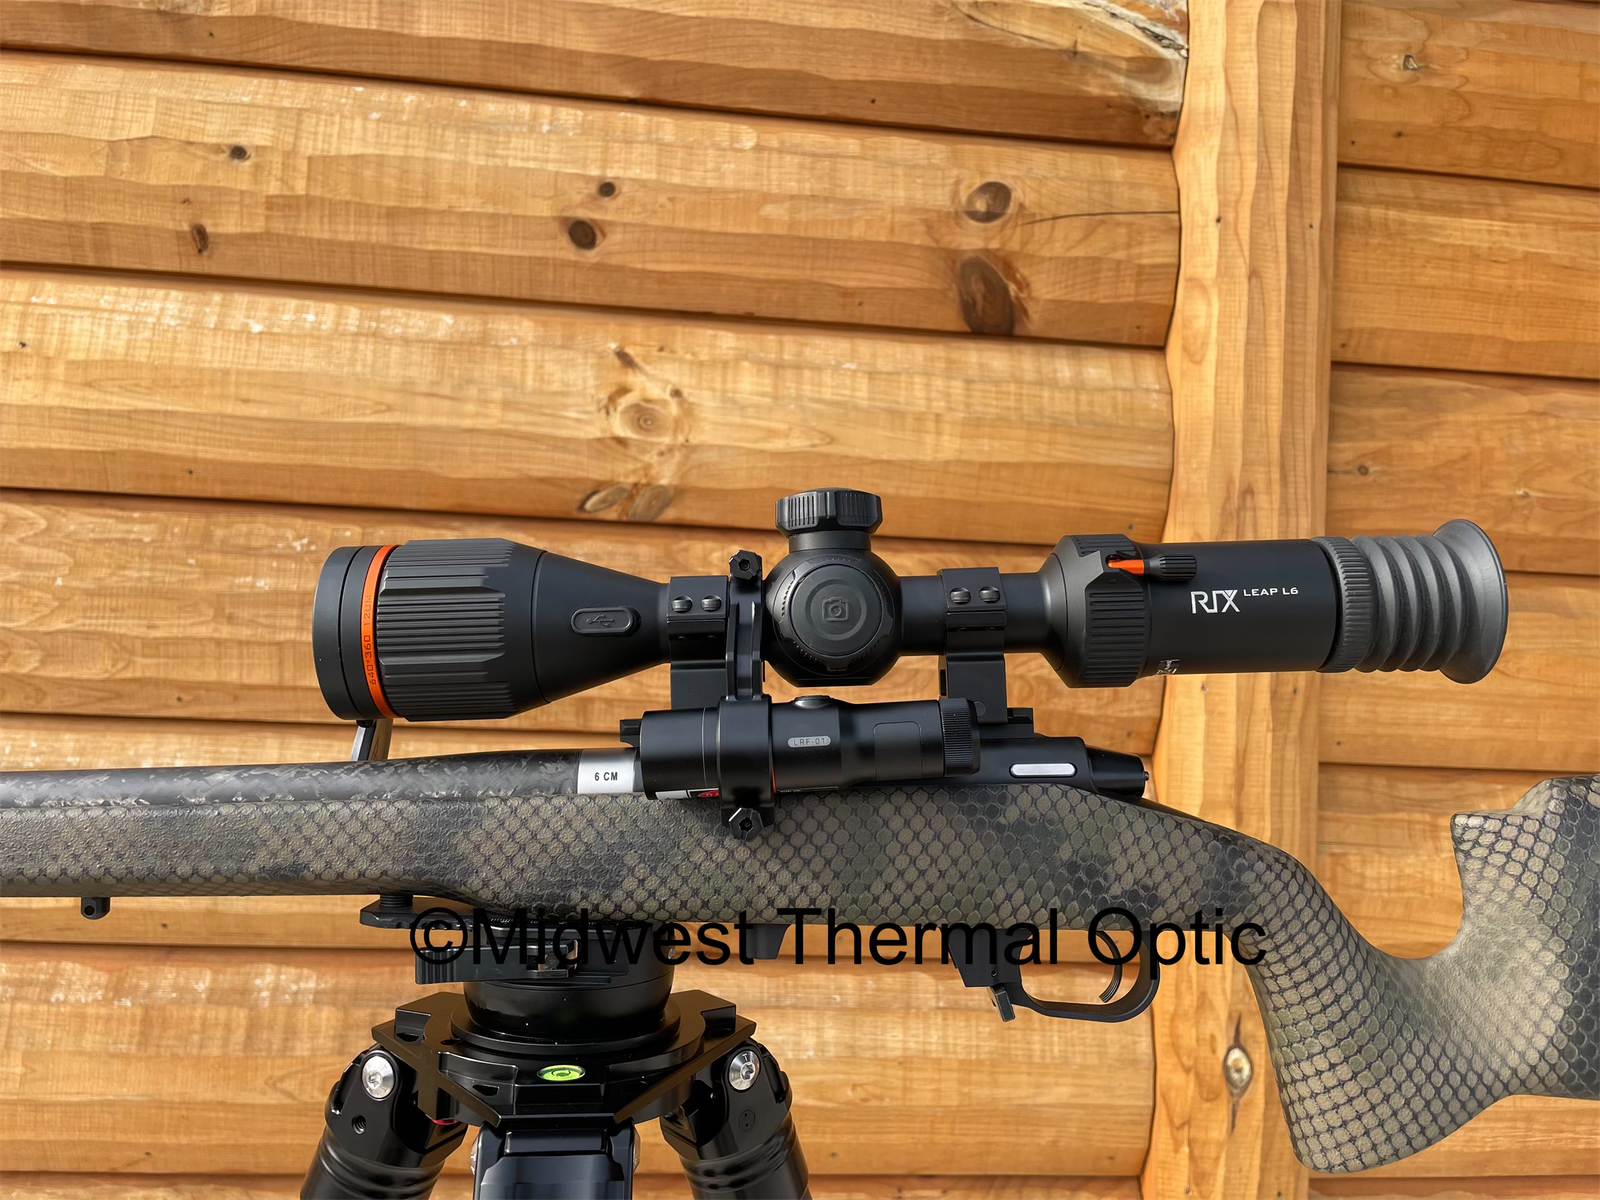 thermal scope with lrf mounted, wood wall behind product